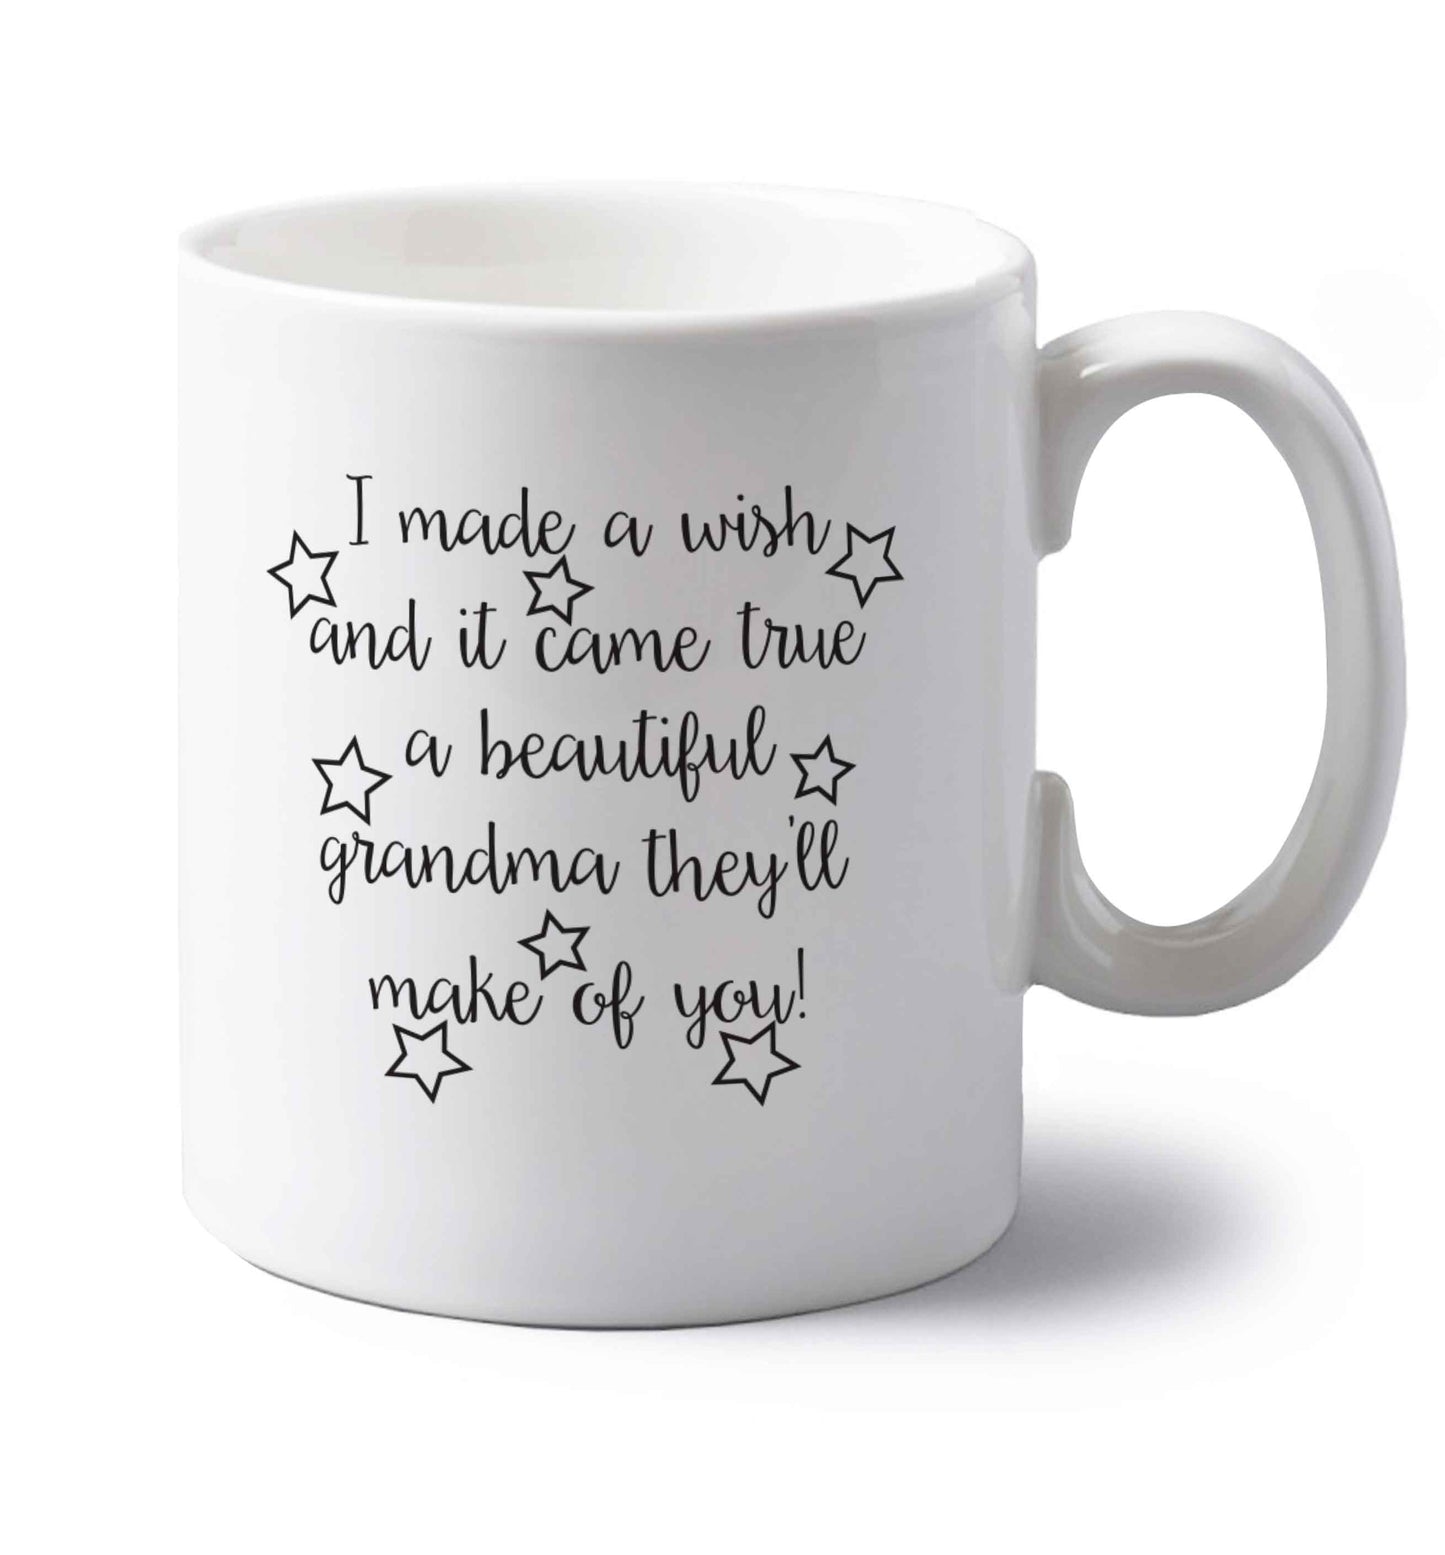 I made a wish and it came true a beautiful grandma they'll make of you! left handed white ceramic mug 